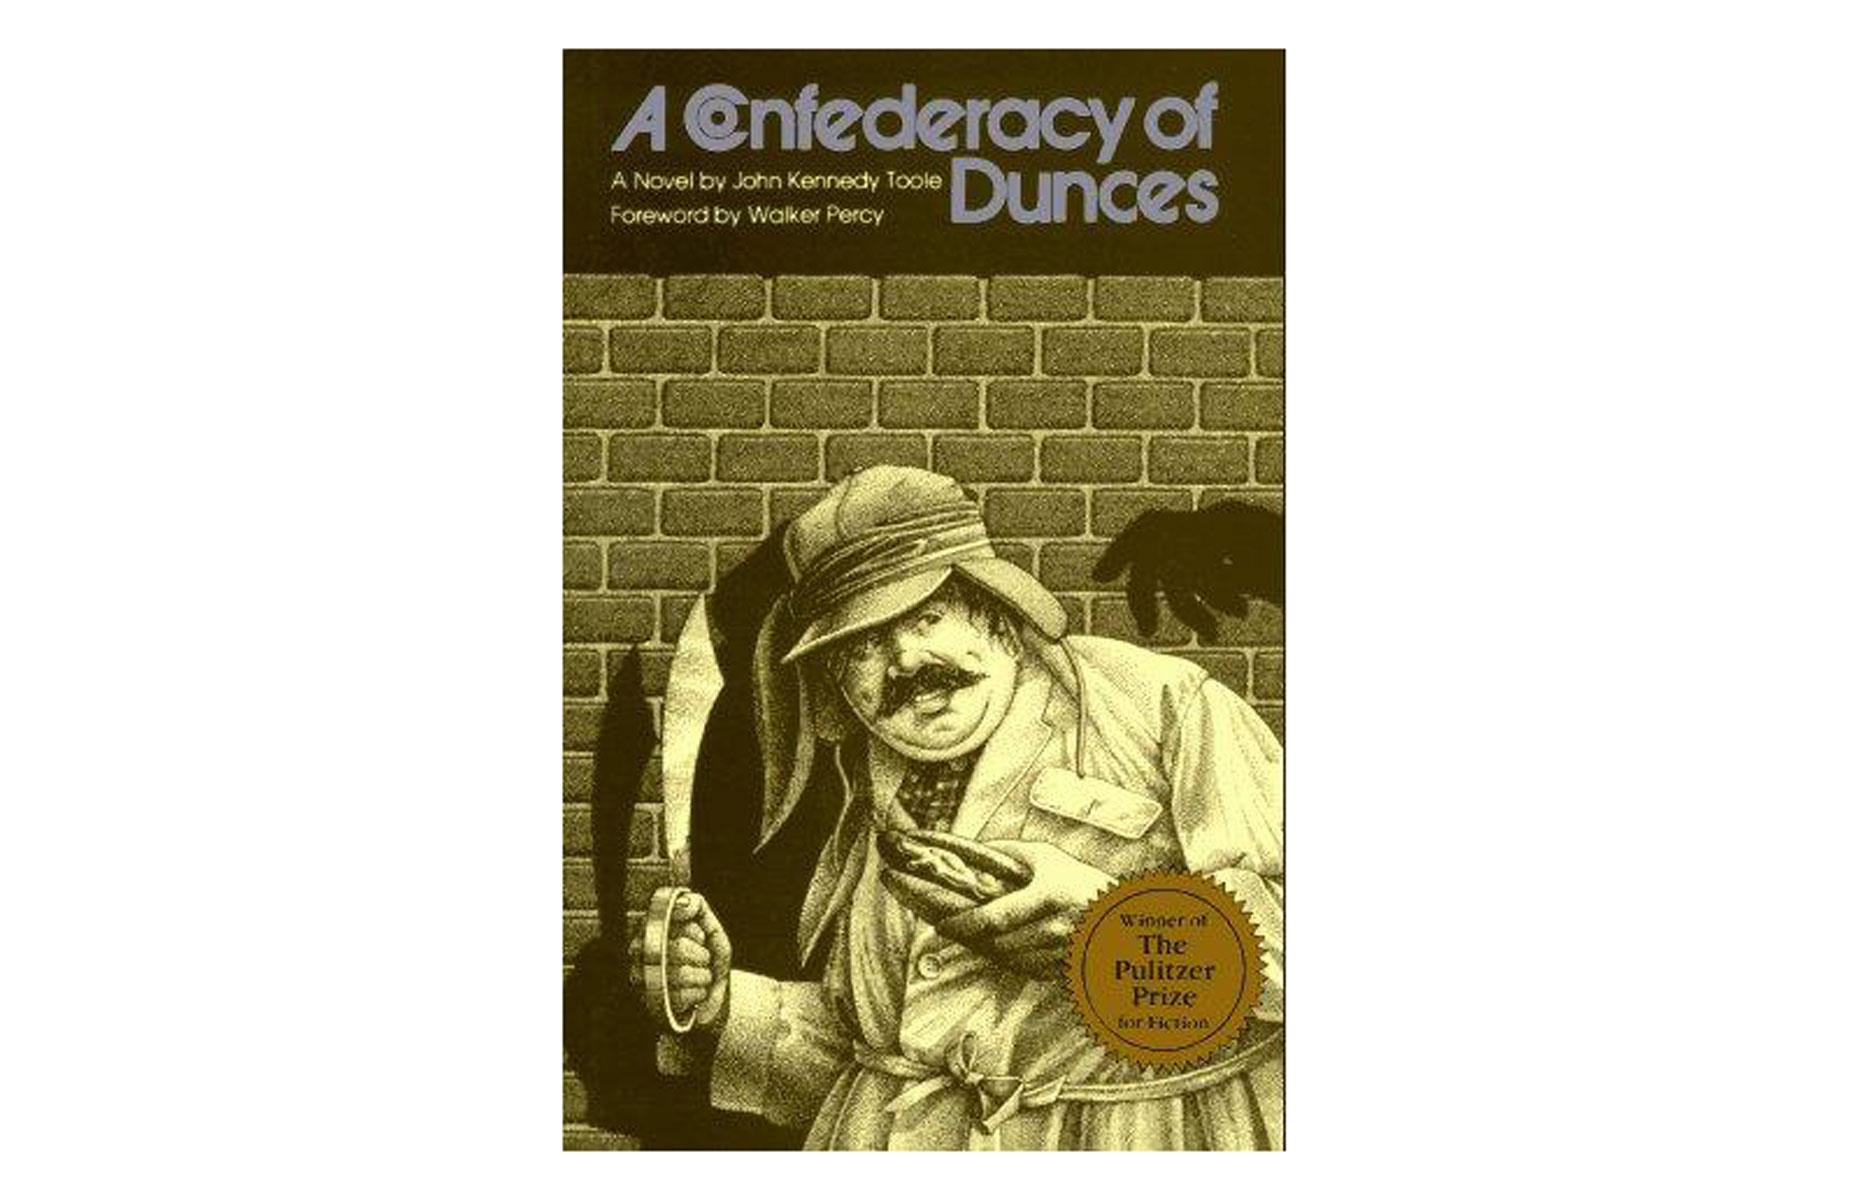 A Confederacy of Dunces by John Kennedy Toole first edition copy: $16,895 (£13.8k)